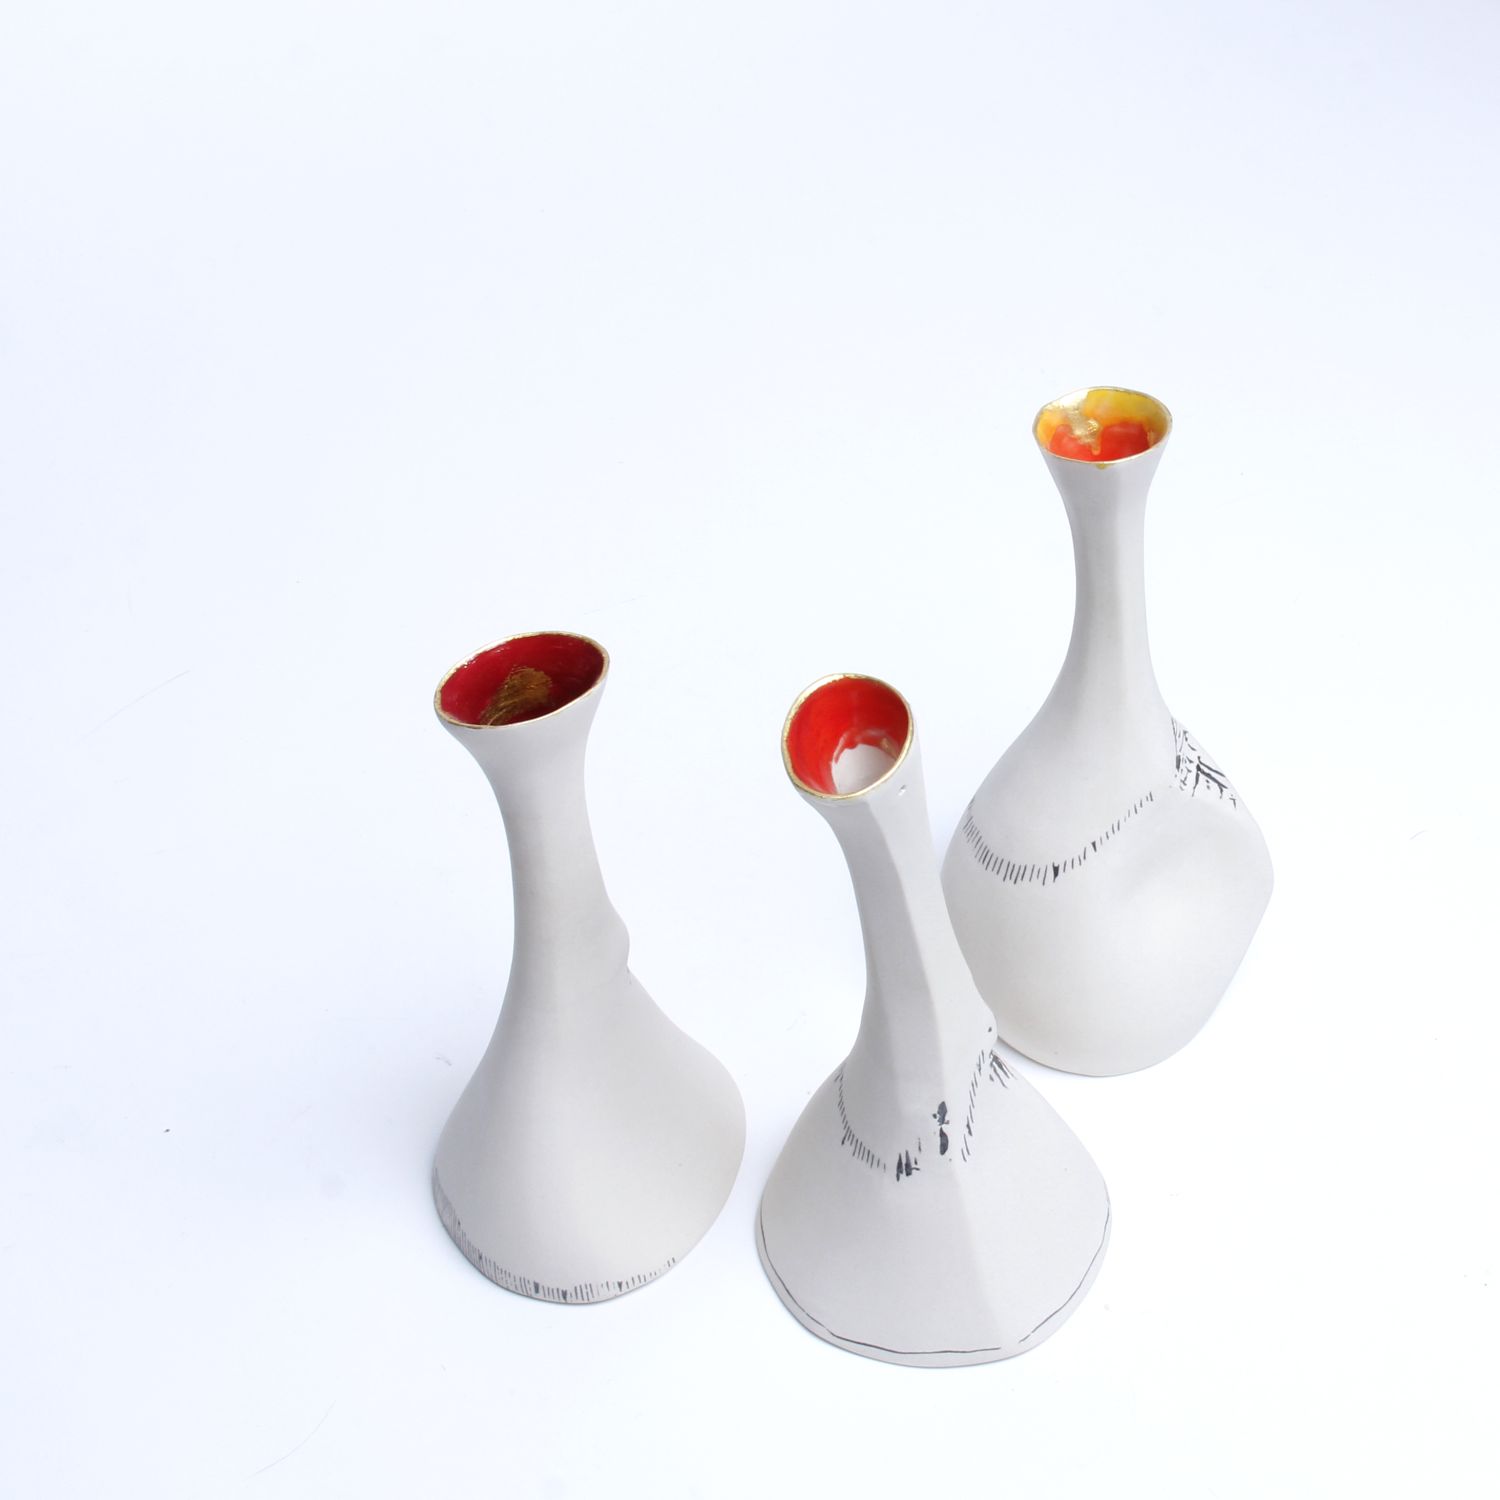 Jane Wilson: Vase (Each sold separately) Product Image 6 of 9